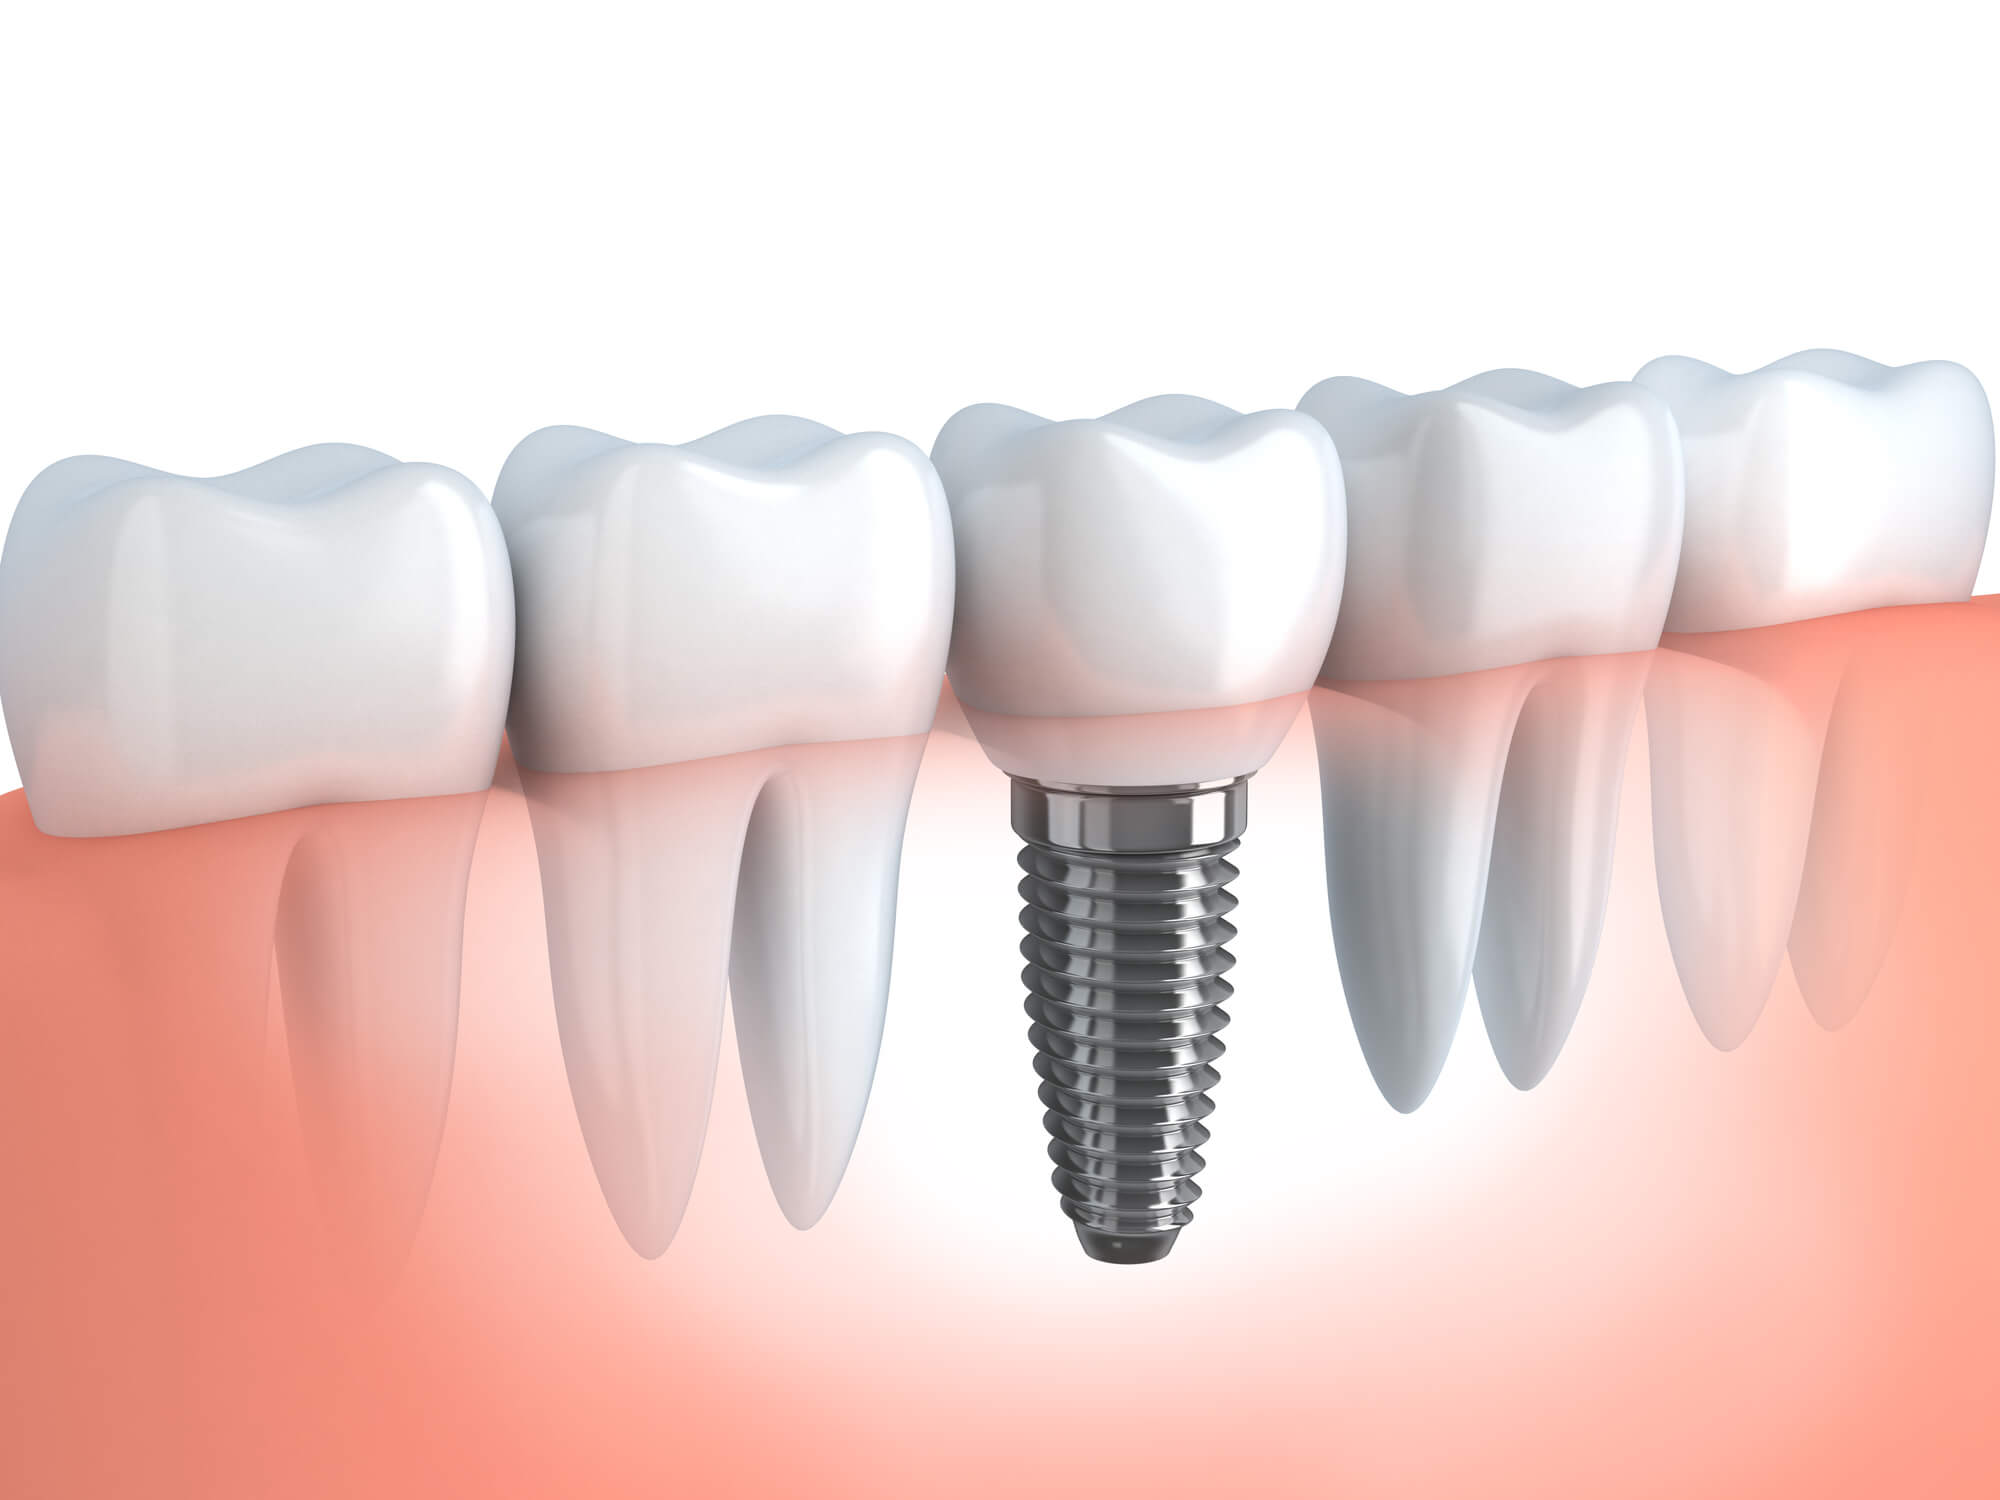 where can i get dental implants in fort pierce fl?